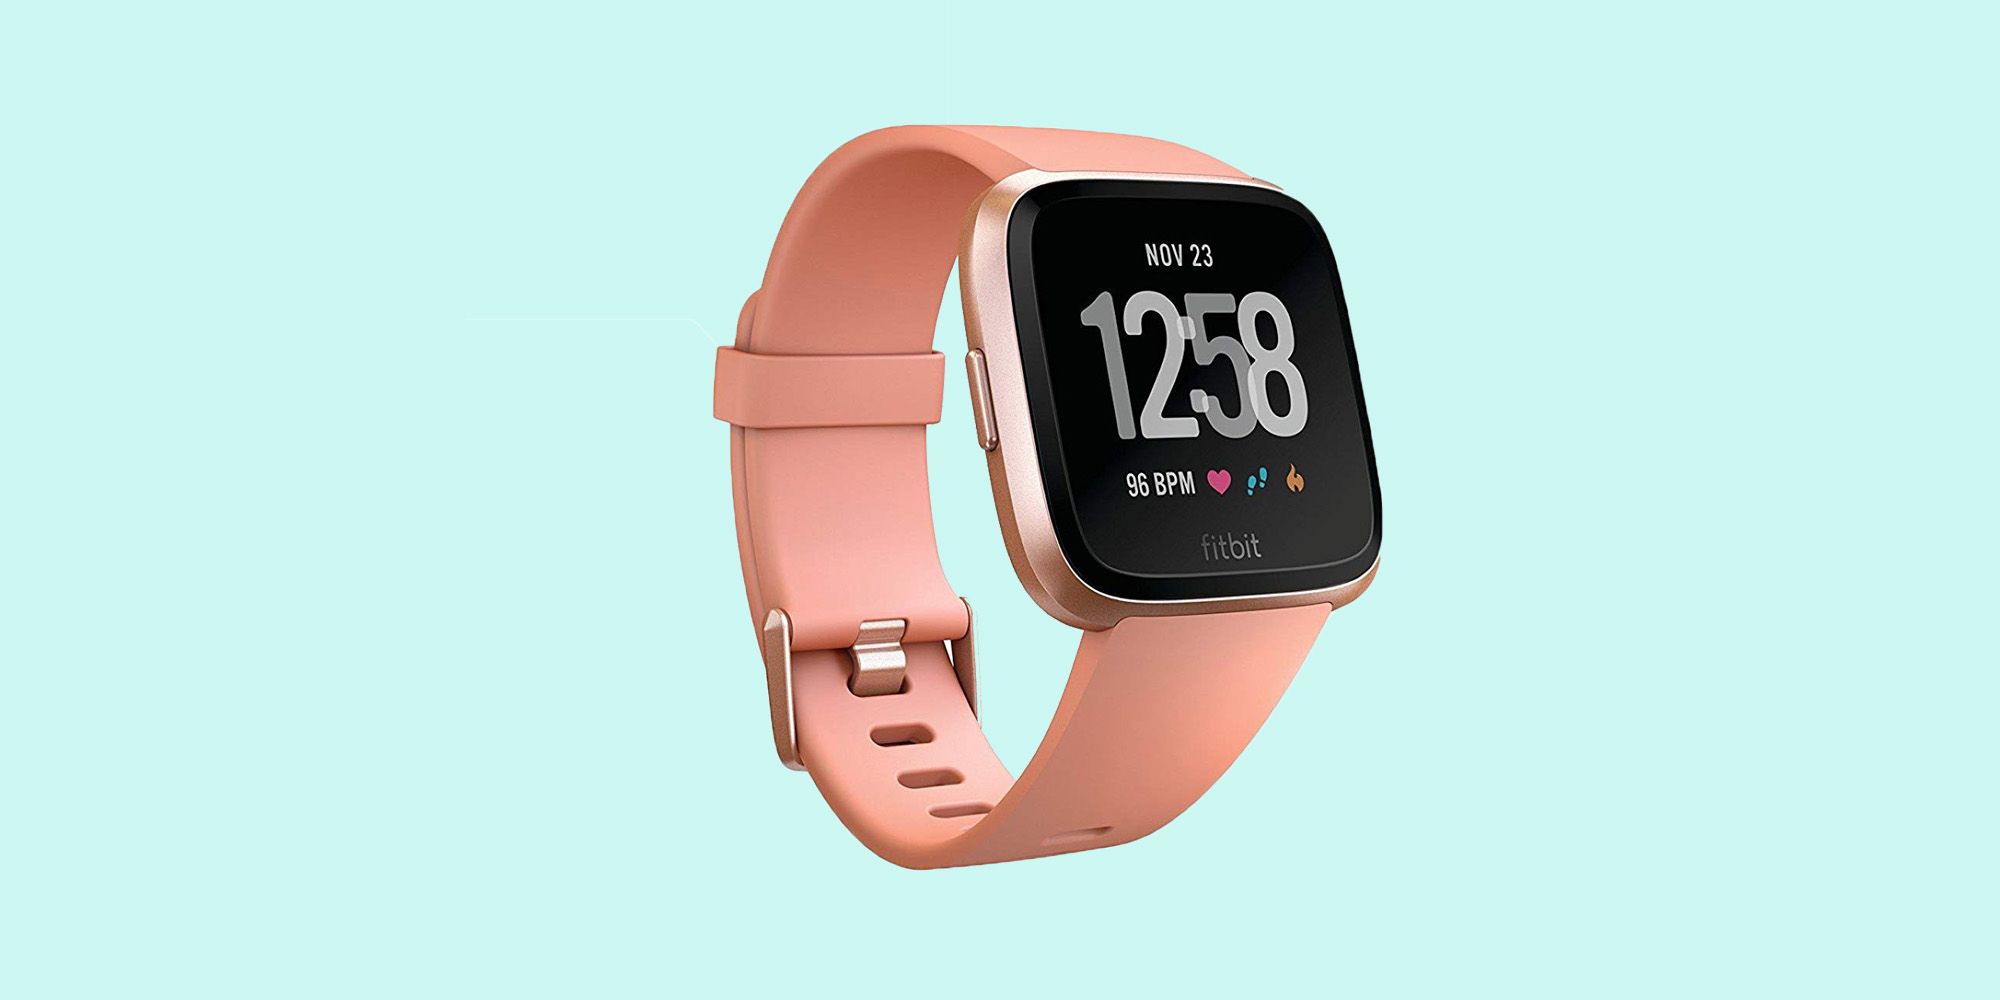 can you play amazon music on fitbit versa